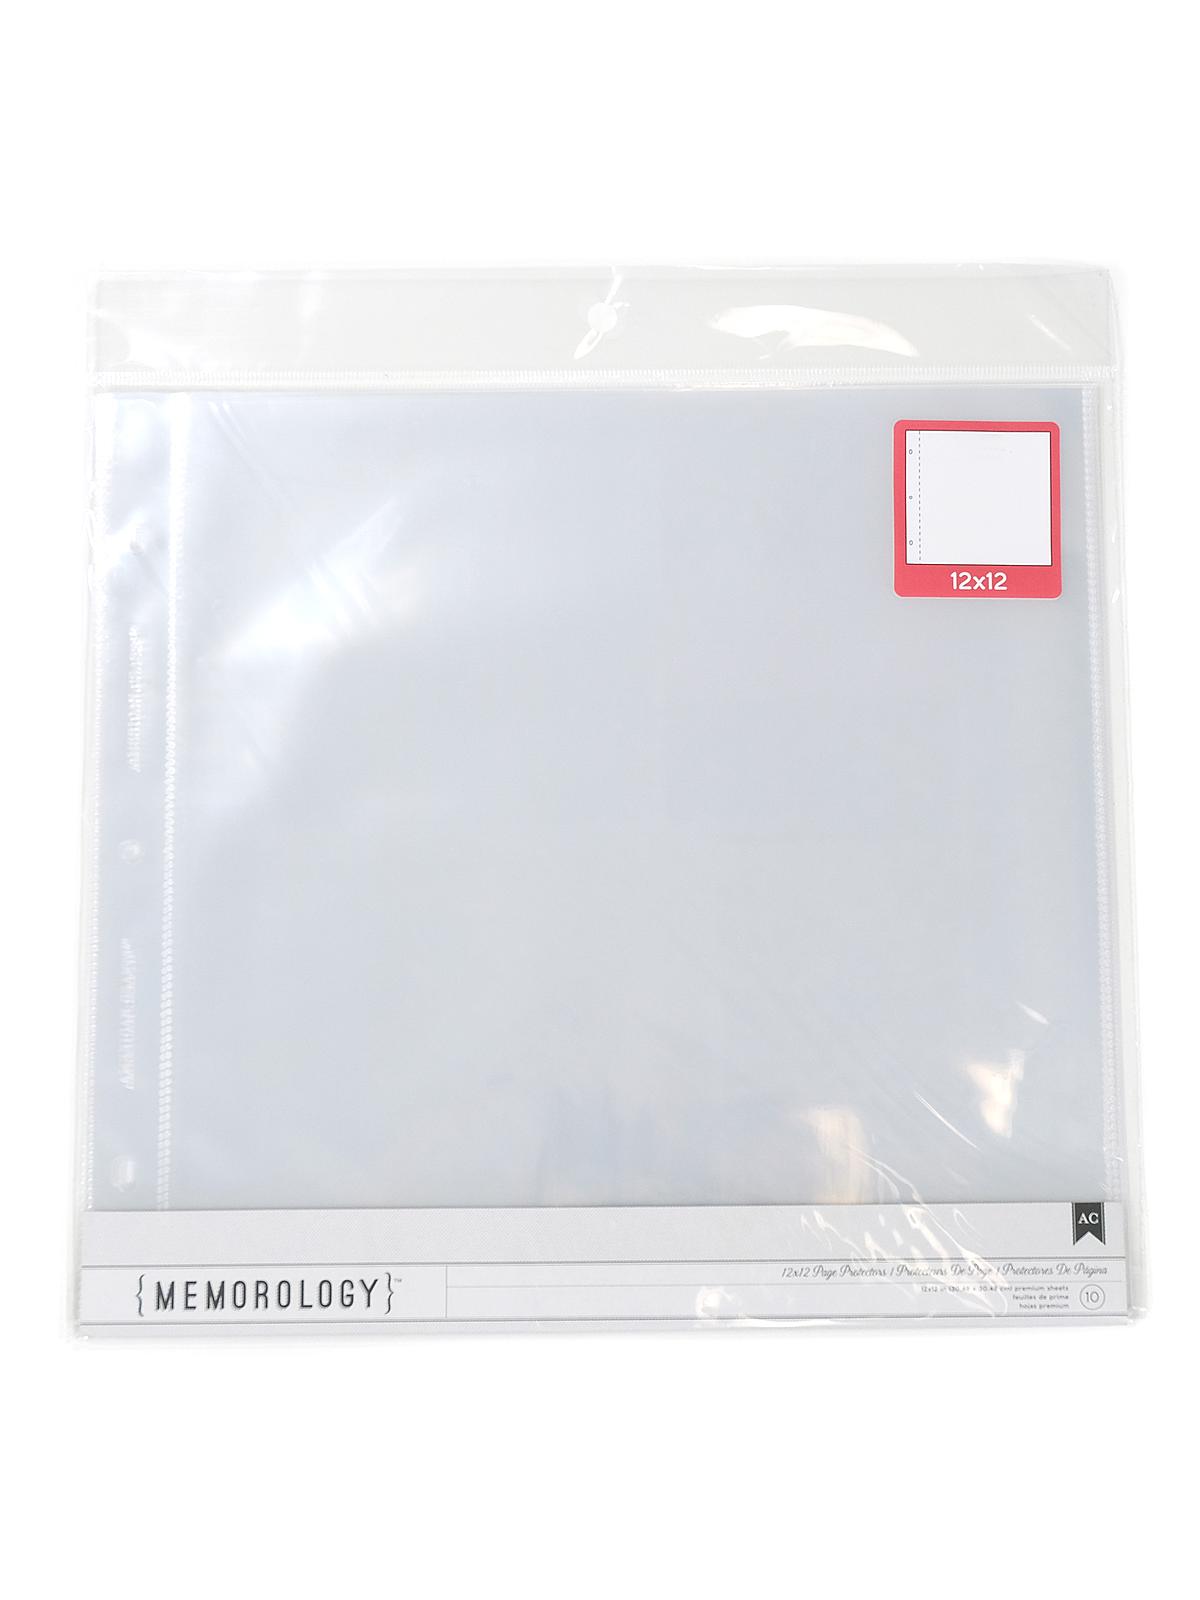 Page Protectors And Photo Protectors 12 In. X 12 In. Page Protector Pack Of 10 Sheets